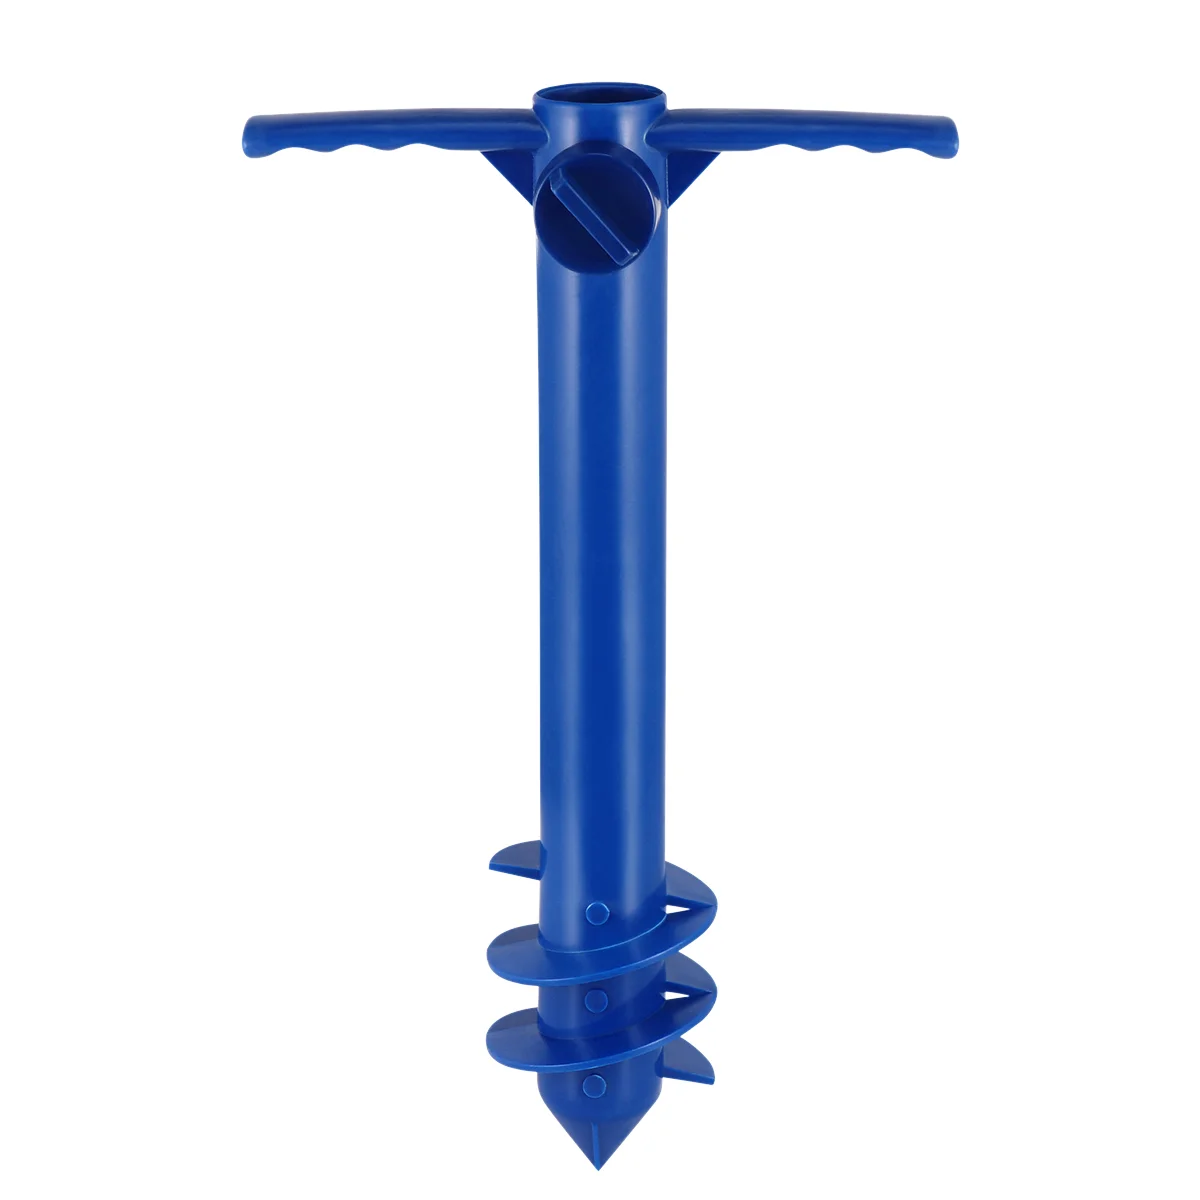 

Beach Sand Anchor Anchor to Resist Strong Winds Spike Stand Holder for Patio Garden Beach